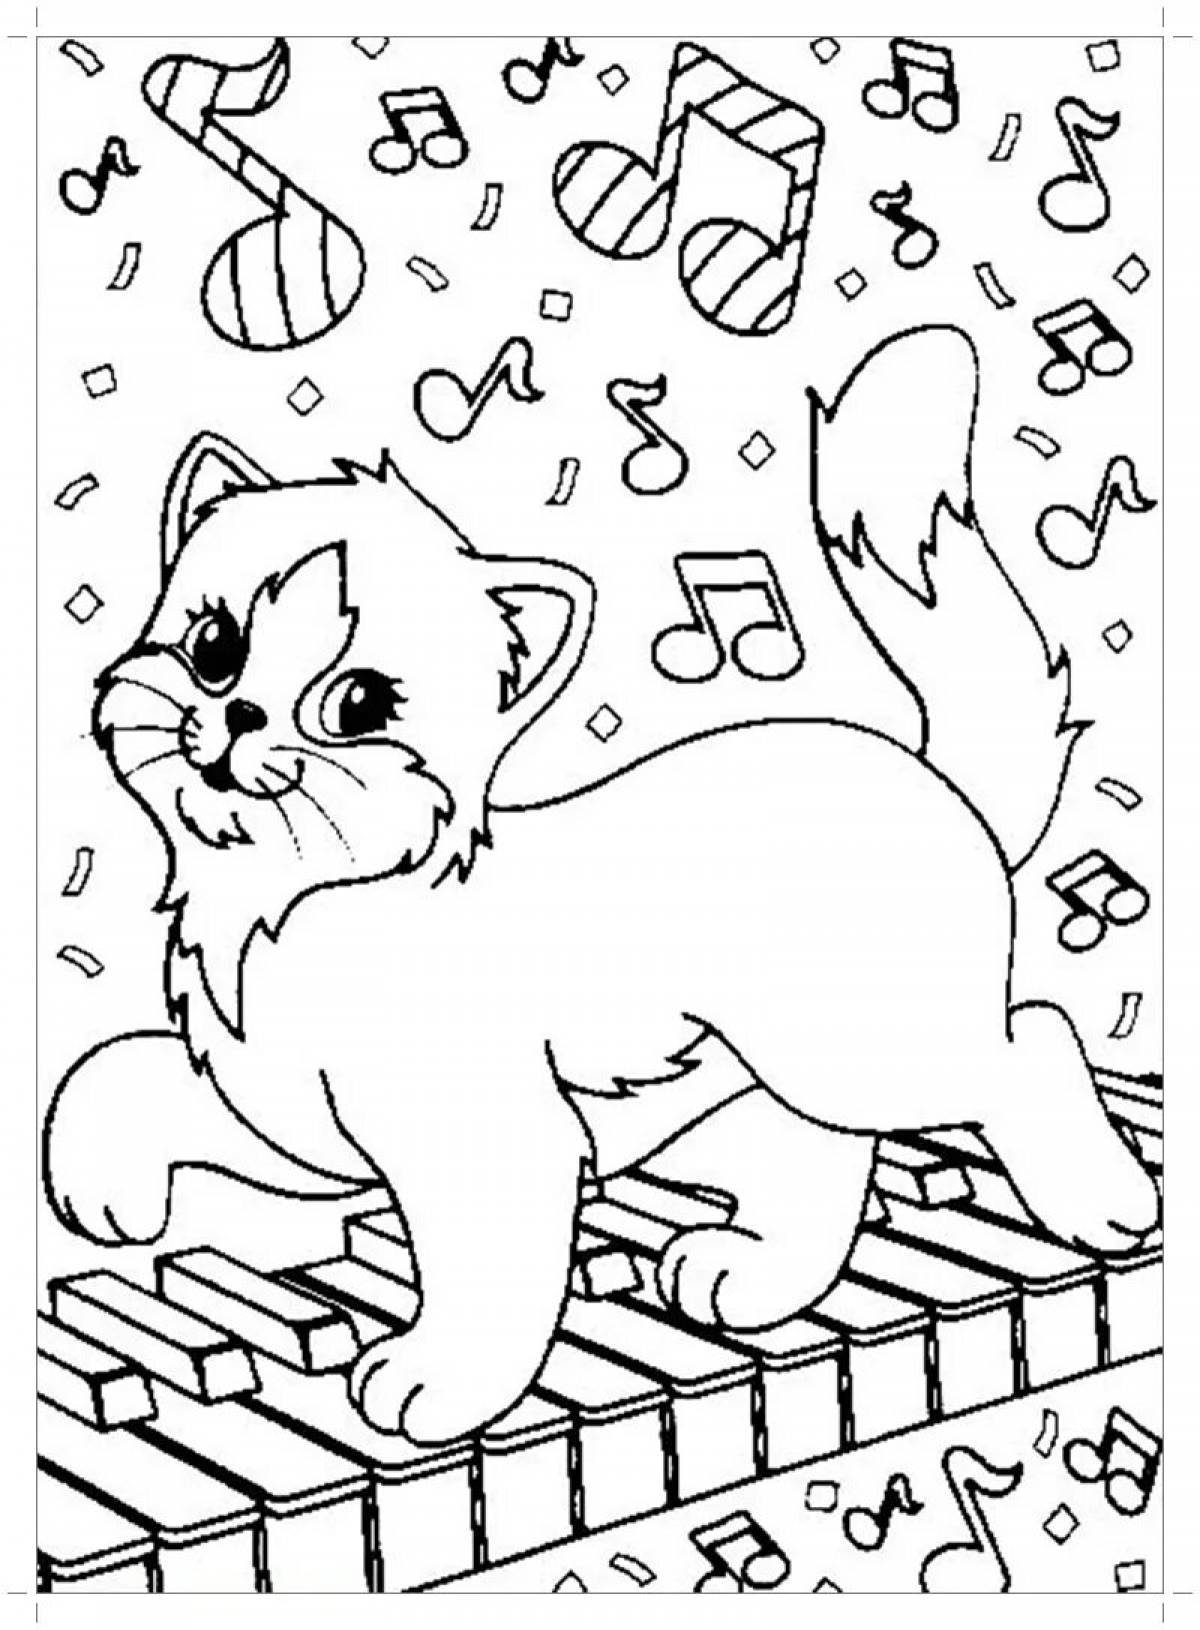 Outstanding coloring book for girls 7 years old animals